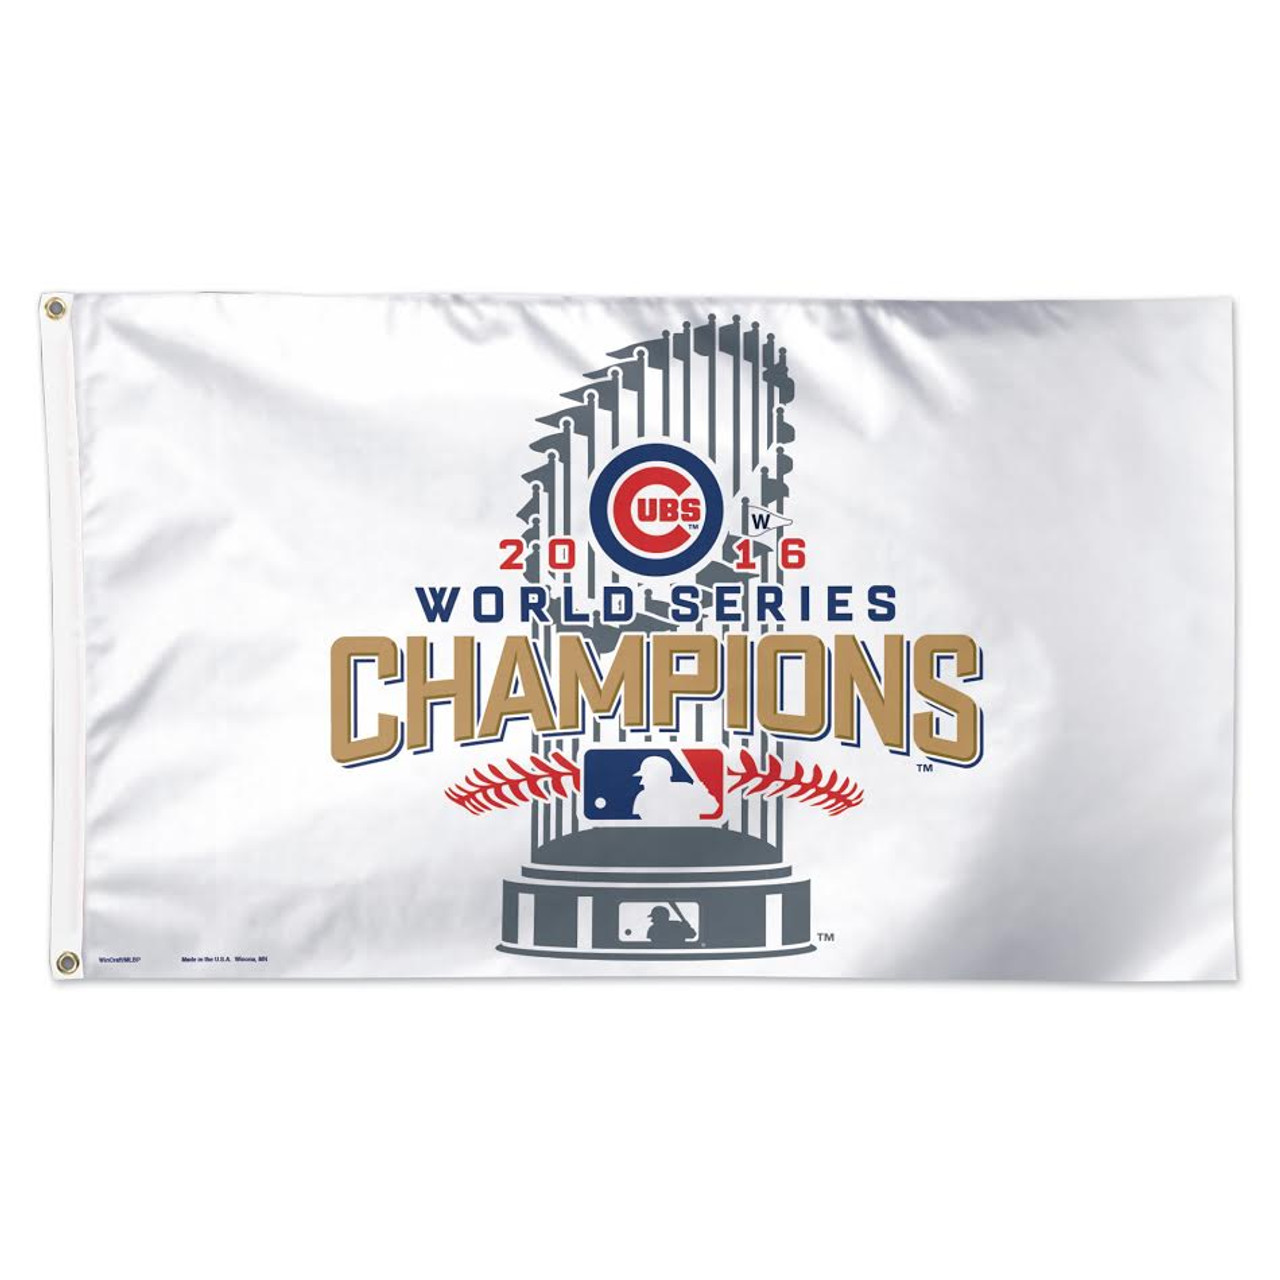 The Chicago Cubs: 2016 World Series Champions